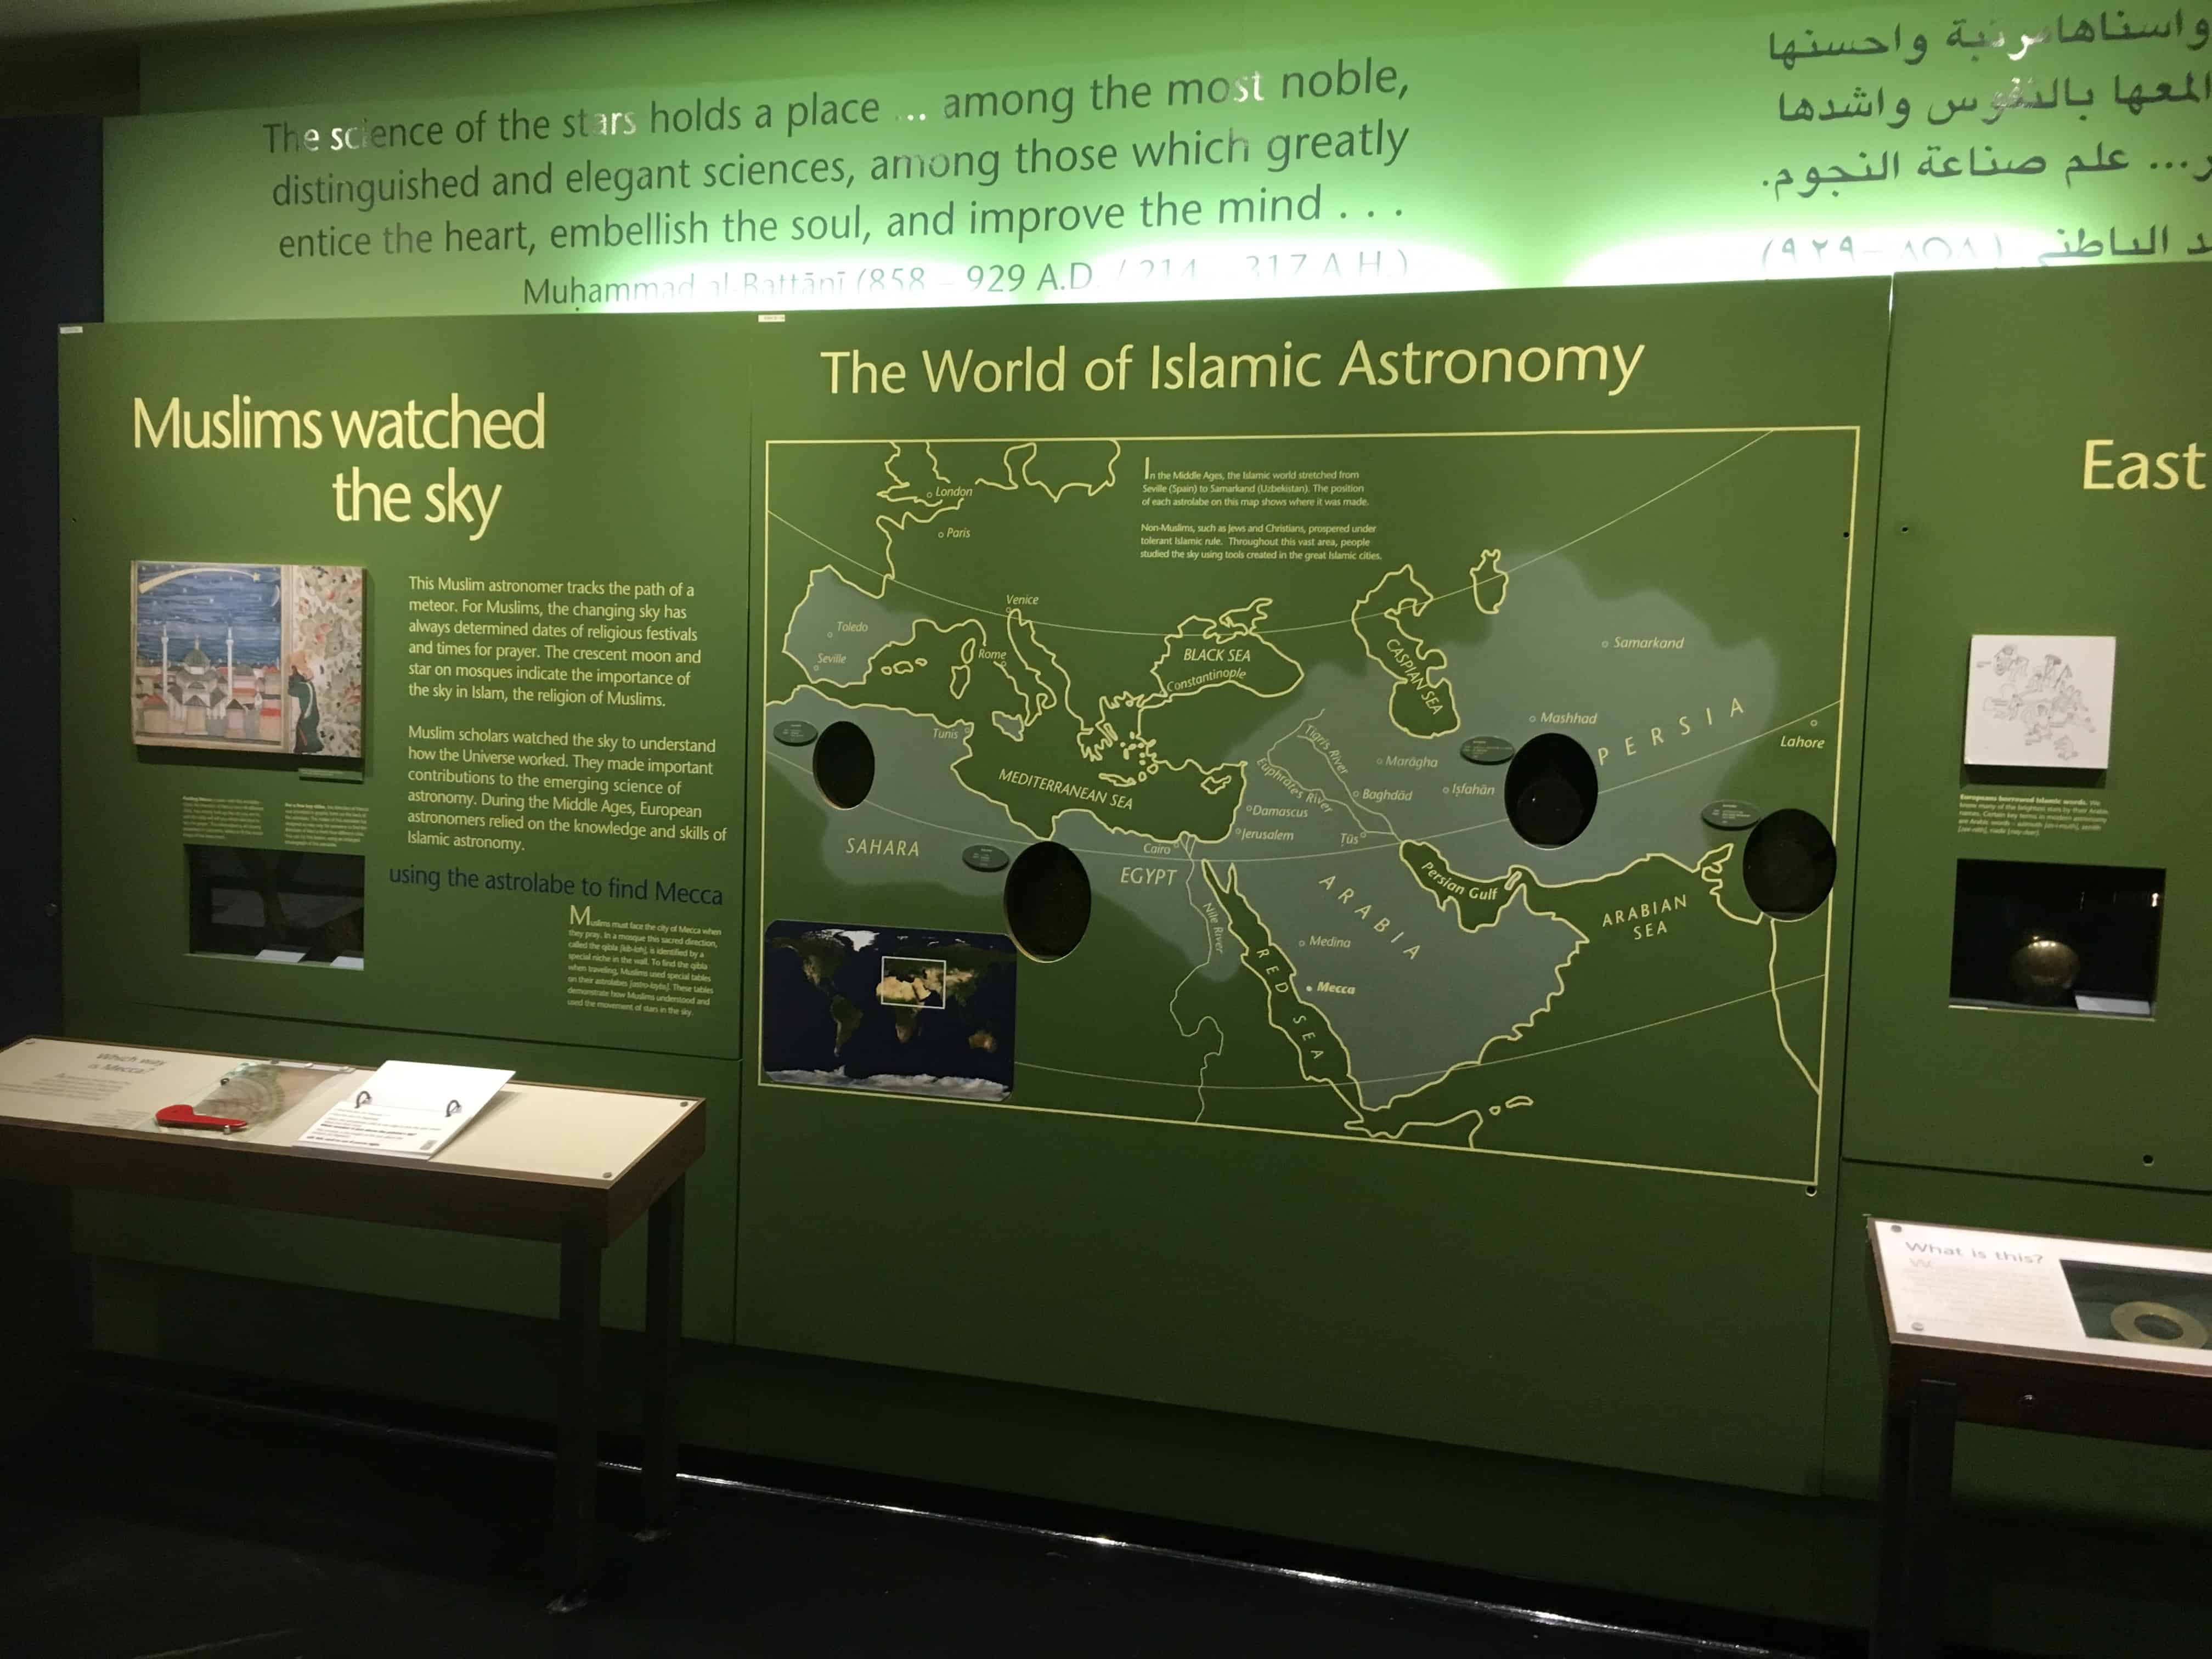 Islamic astronomy in Astronomy in Culture